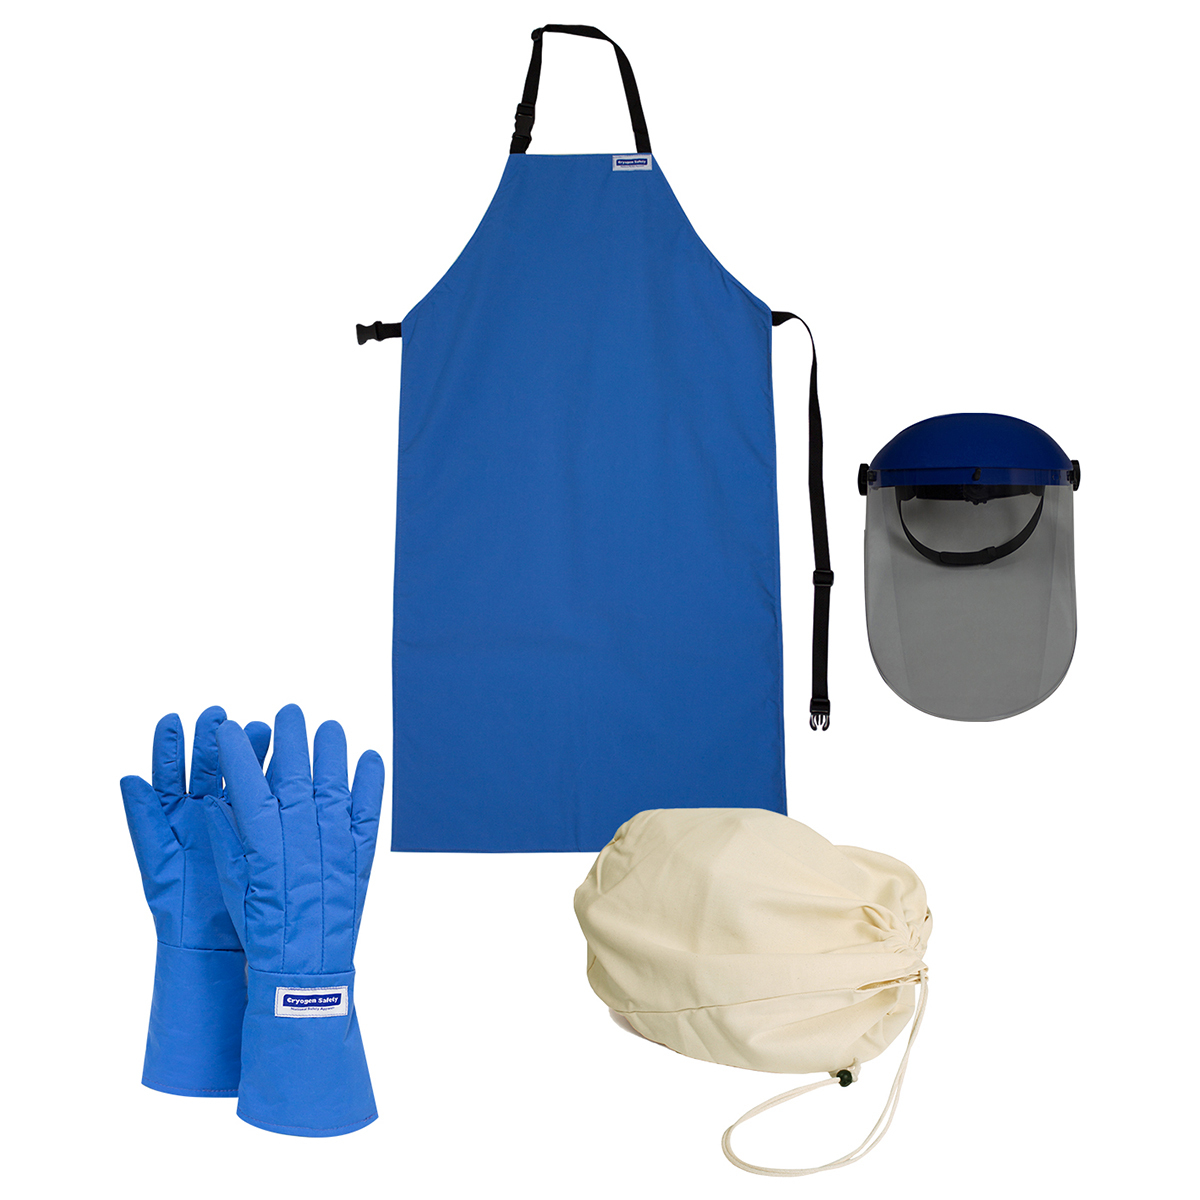 National Safety Apparel® X-Large Thinsulate™ Lined Teflon™ Laminated Nylon Mid-Arm Length Waterproof Cryogen Glove Kit